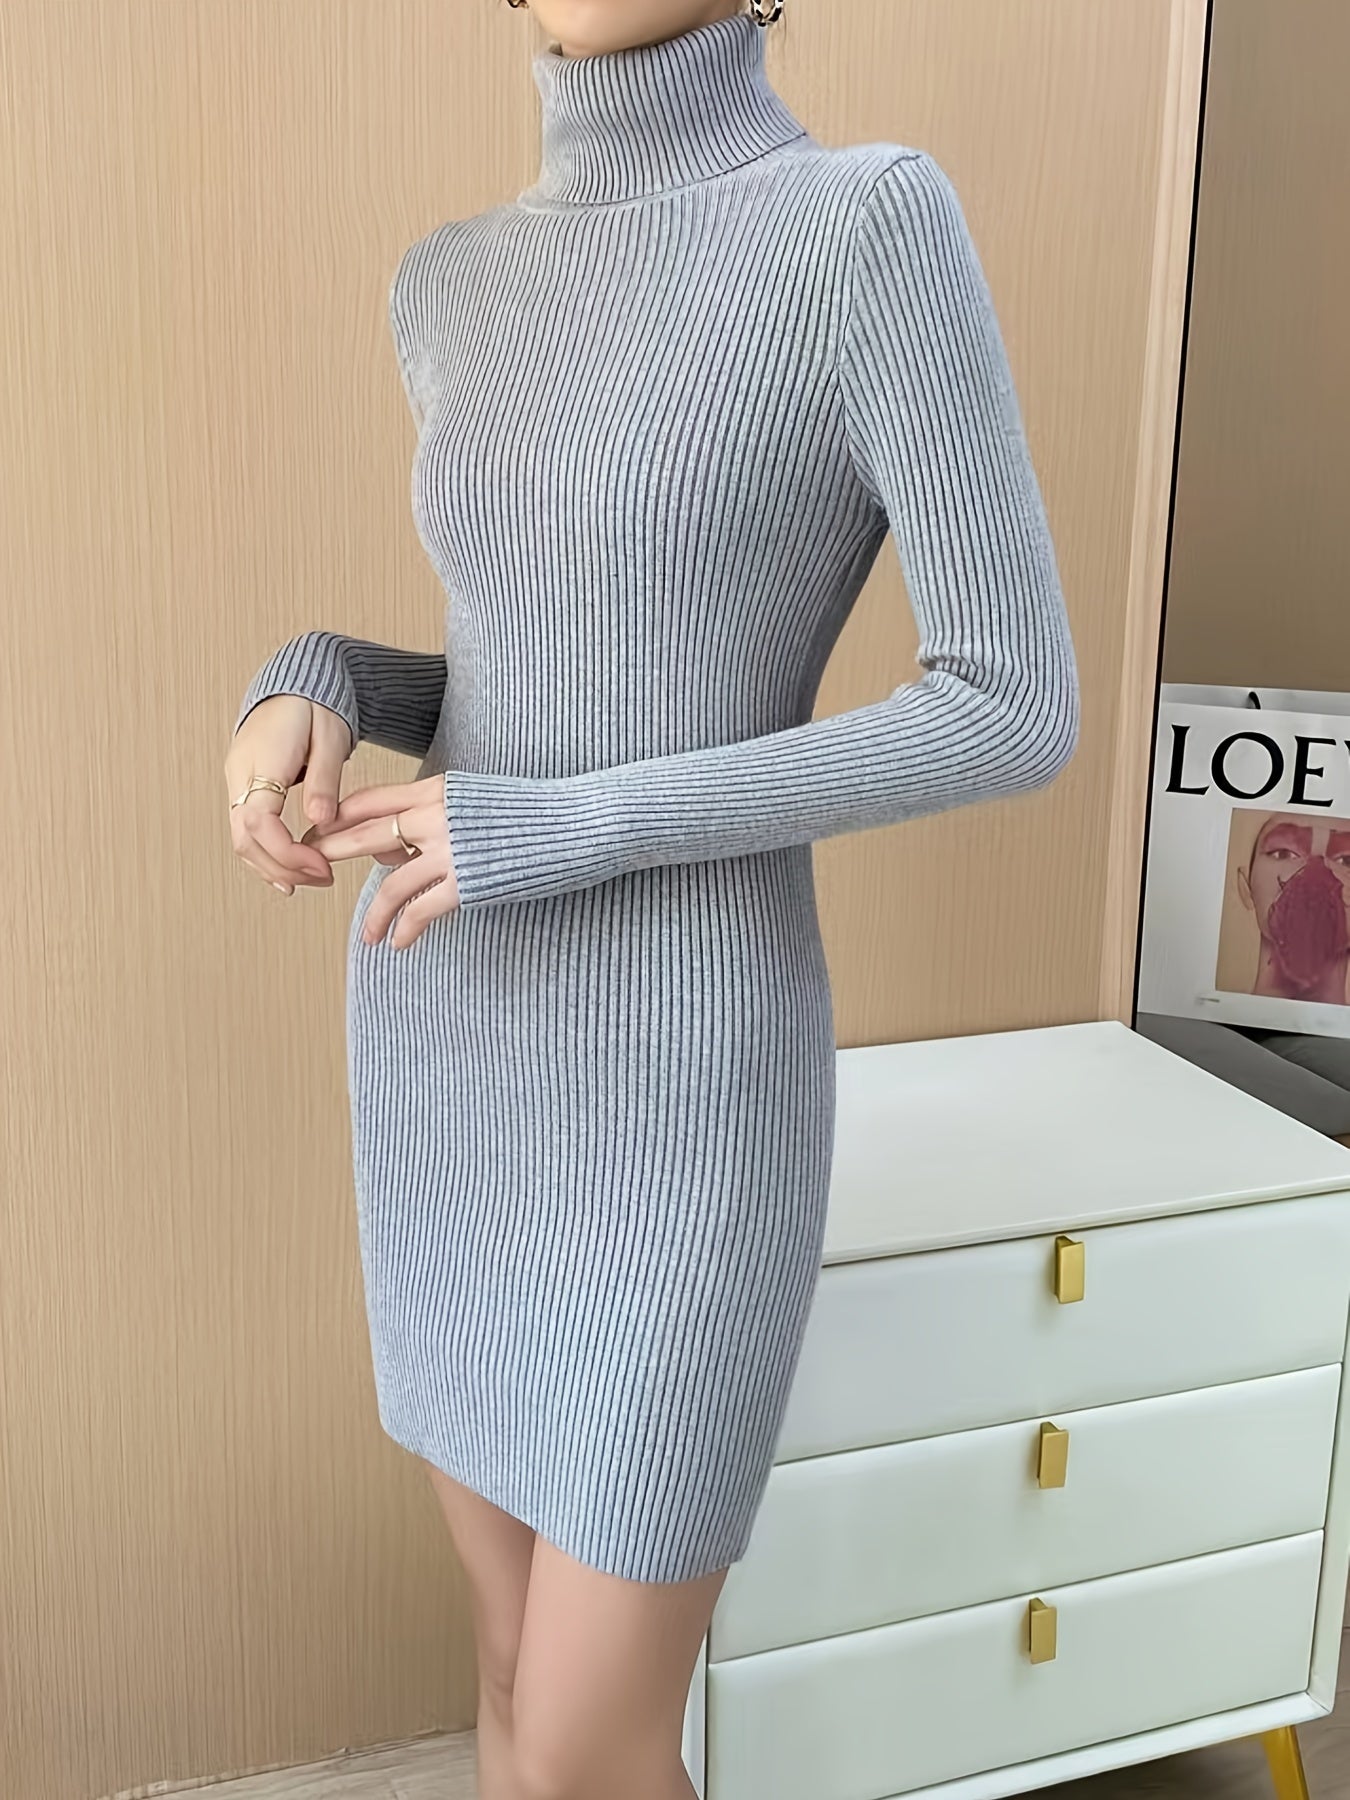 vlovelaw  Elegant Solid Turtleneck Bodycon Dress, Long Sleeve Casual Every Day Dress For Winter & Fall, Women's Clothing